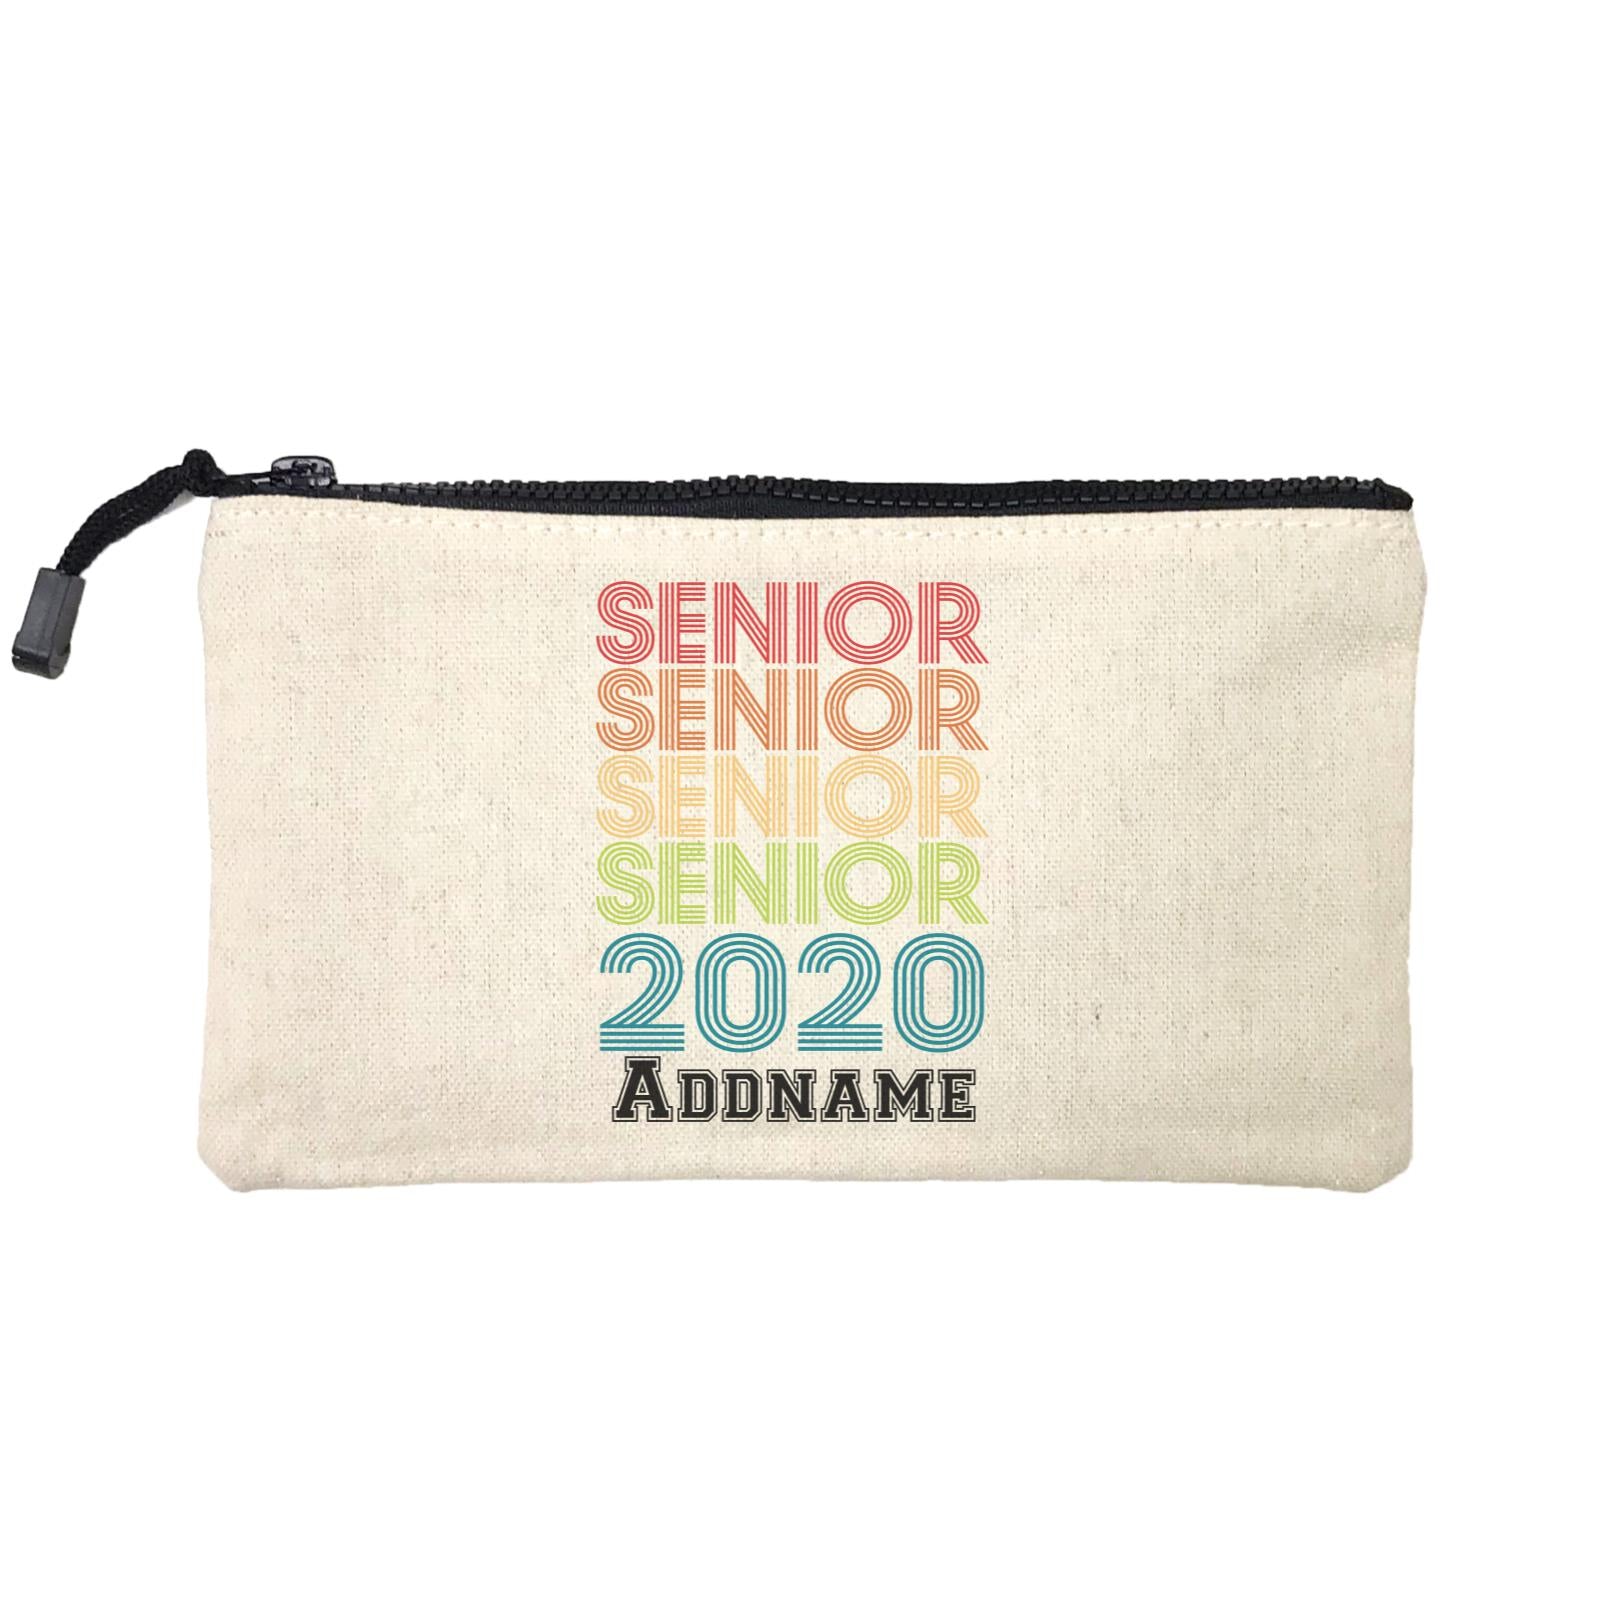 Graduation Series Senior in Rainbow Colors Mini Accessories Stationery Pouch